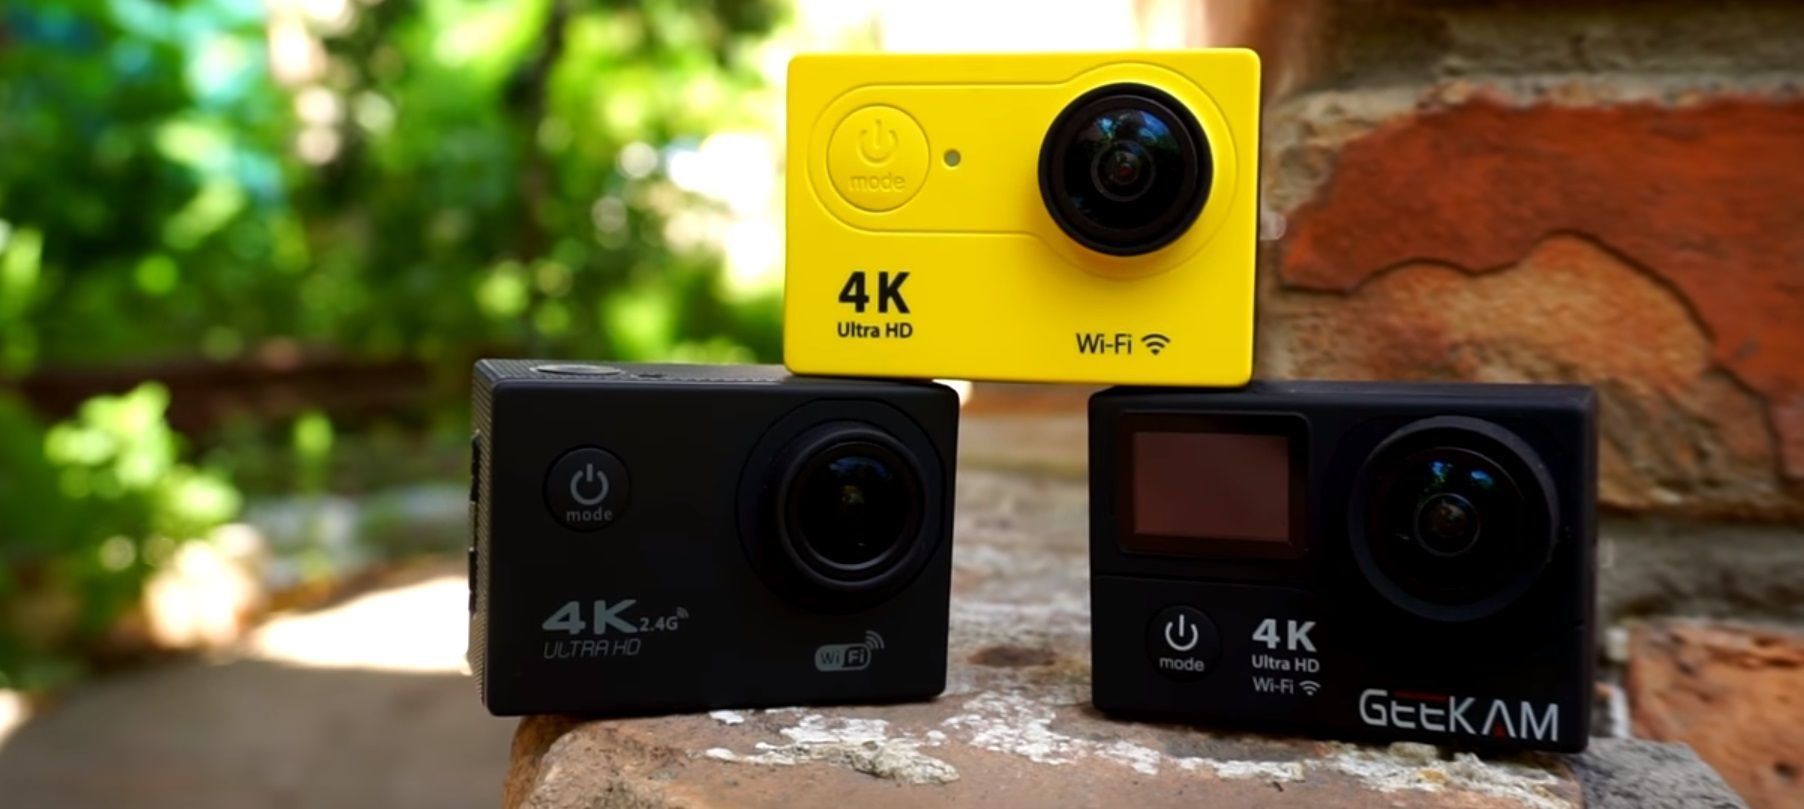 Review of the best EKEN action cameras for 2020